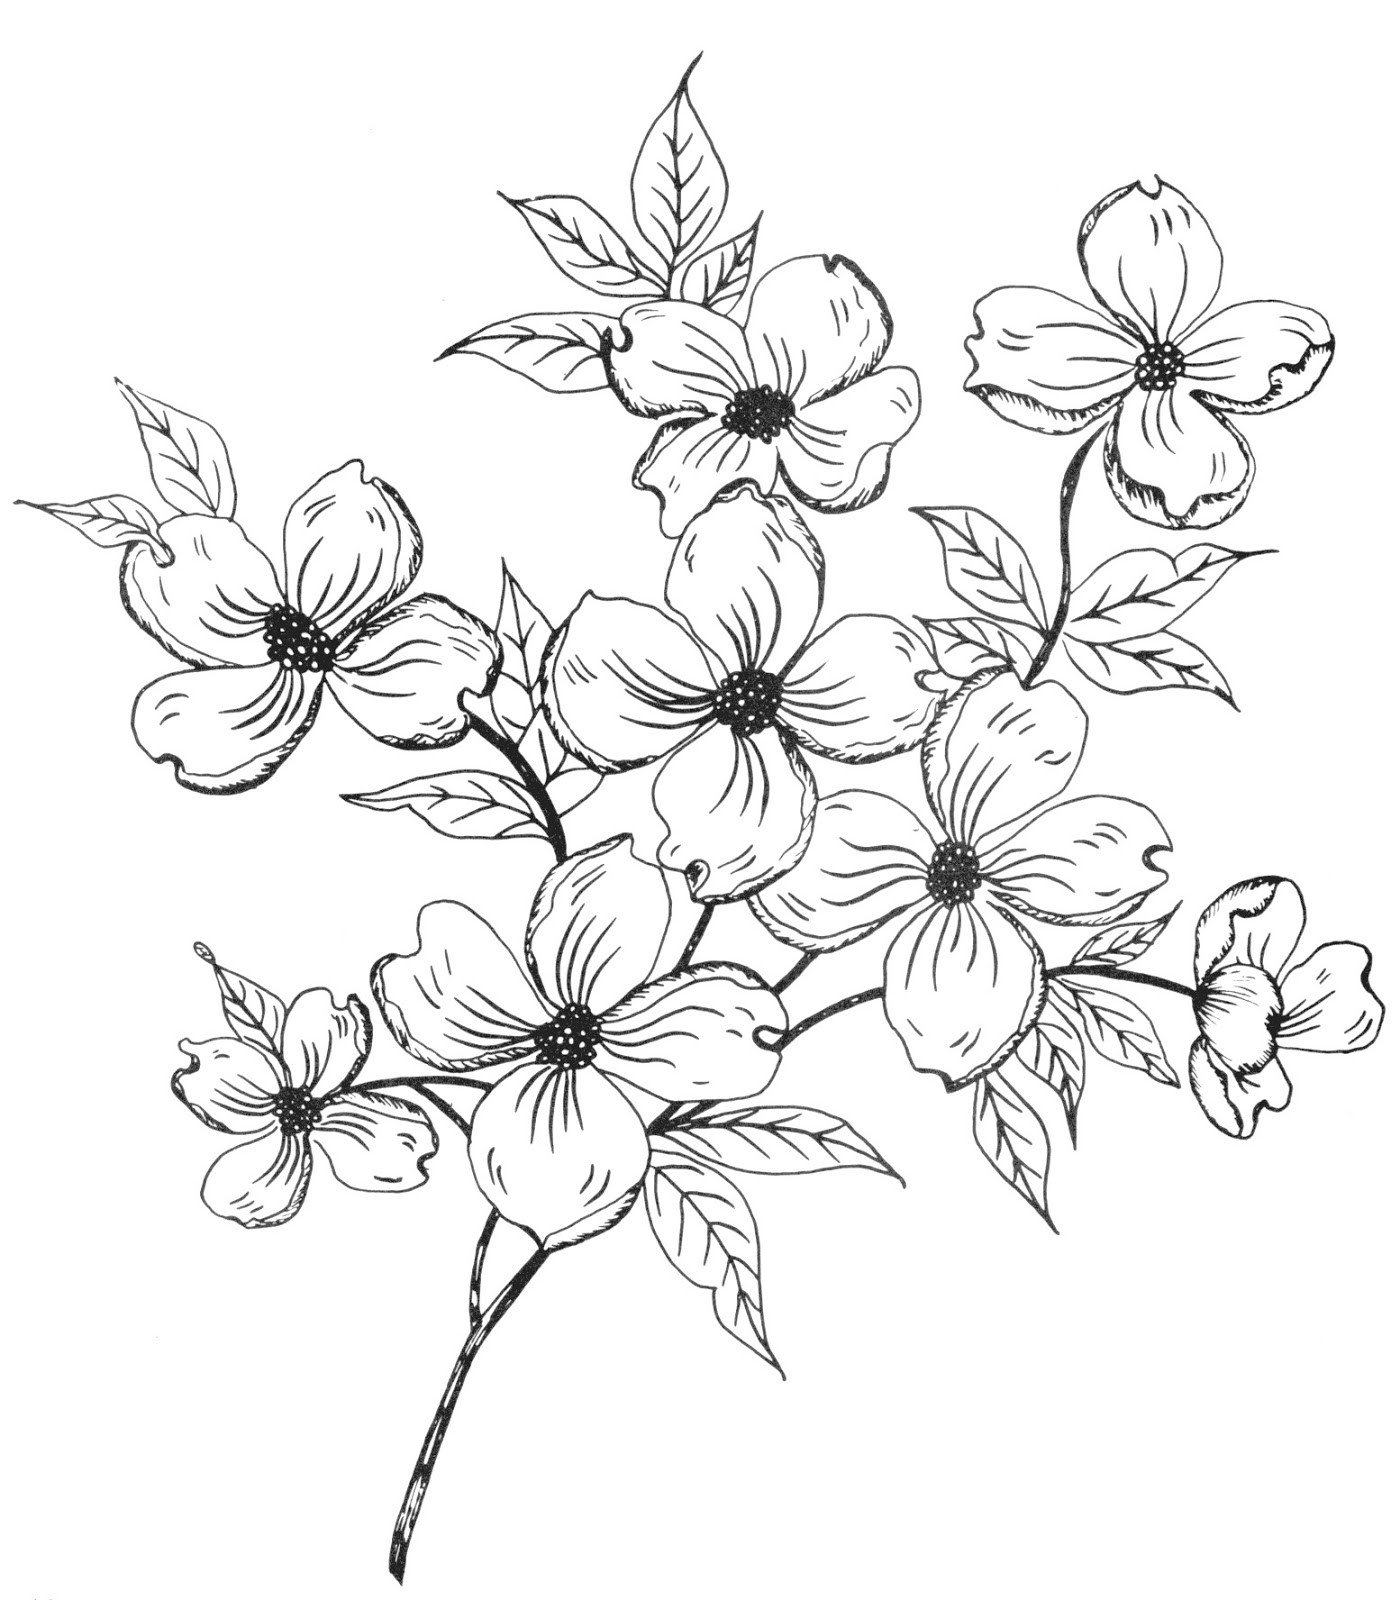 White Flower clipart dogwood Pencil and in color white